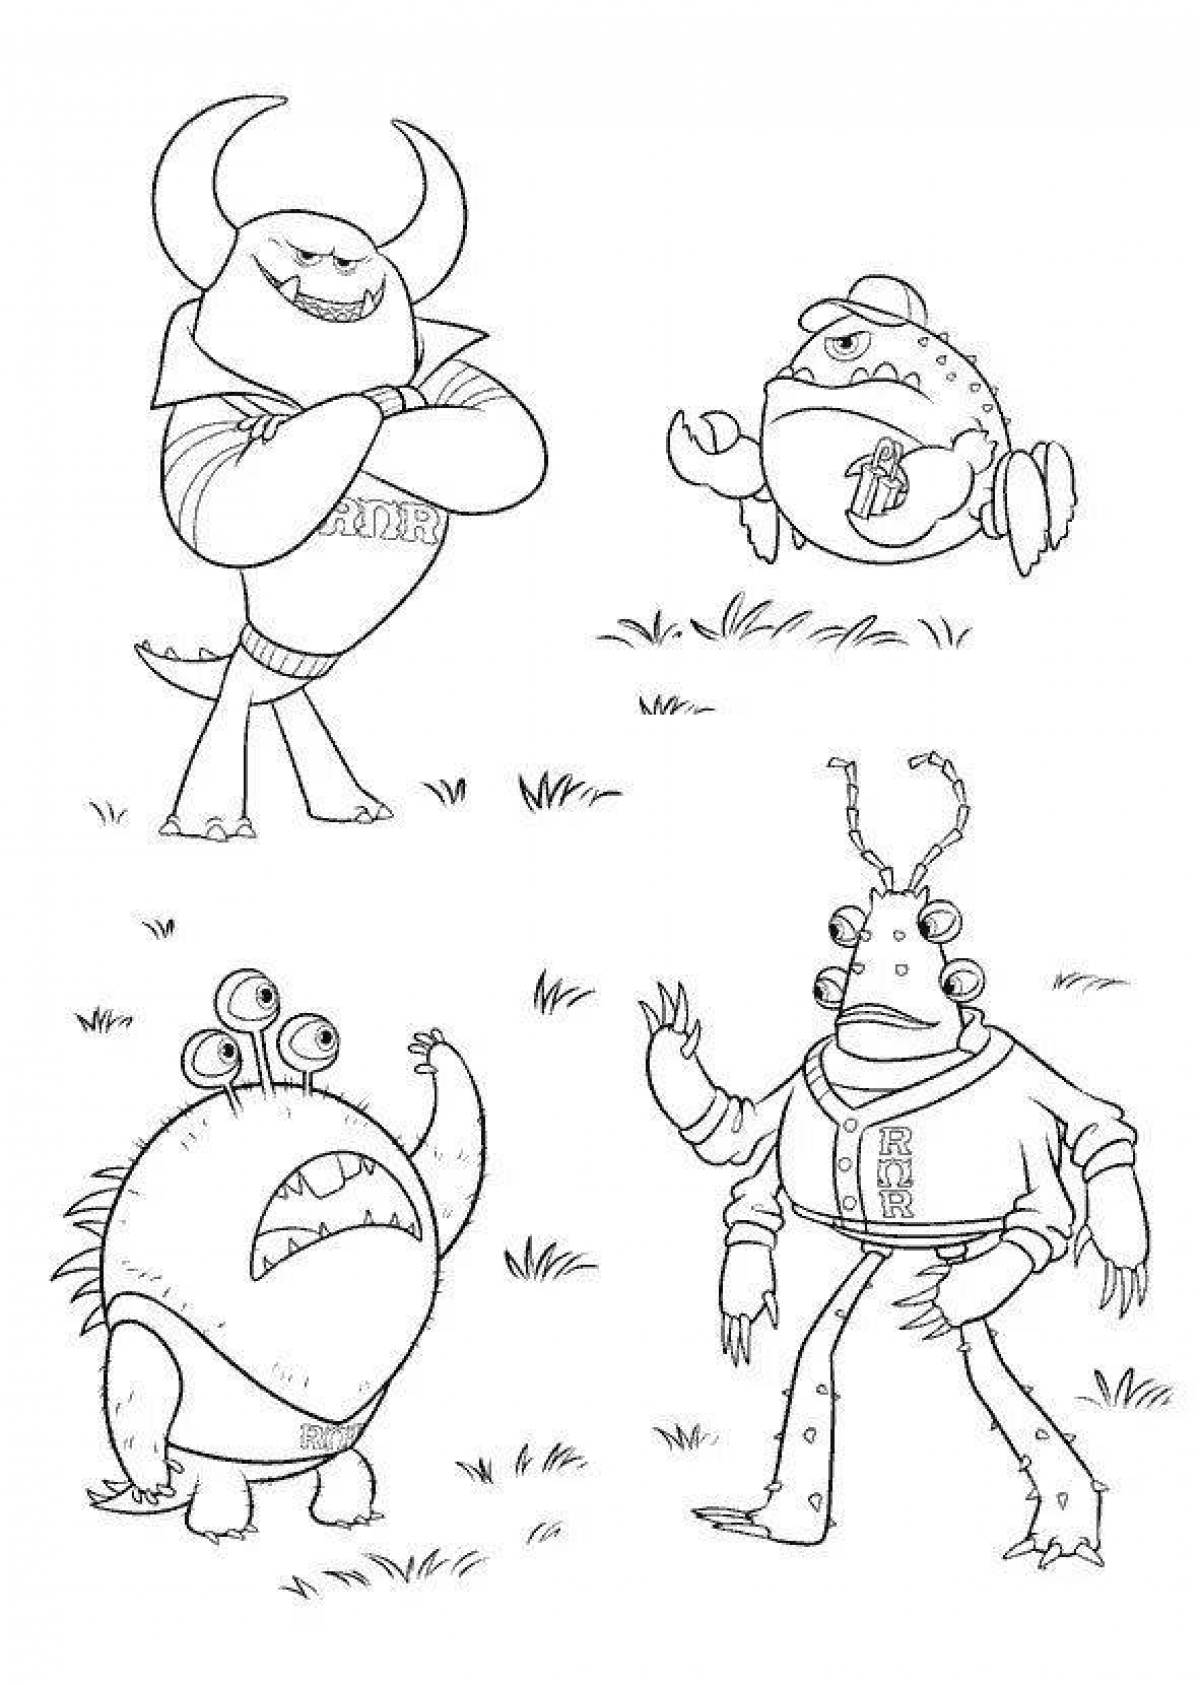 Coloring page of extraordinary monsters university